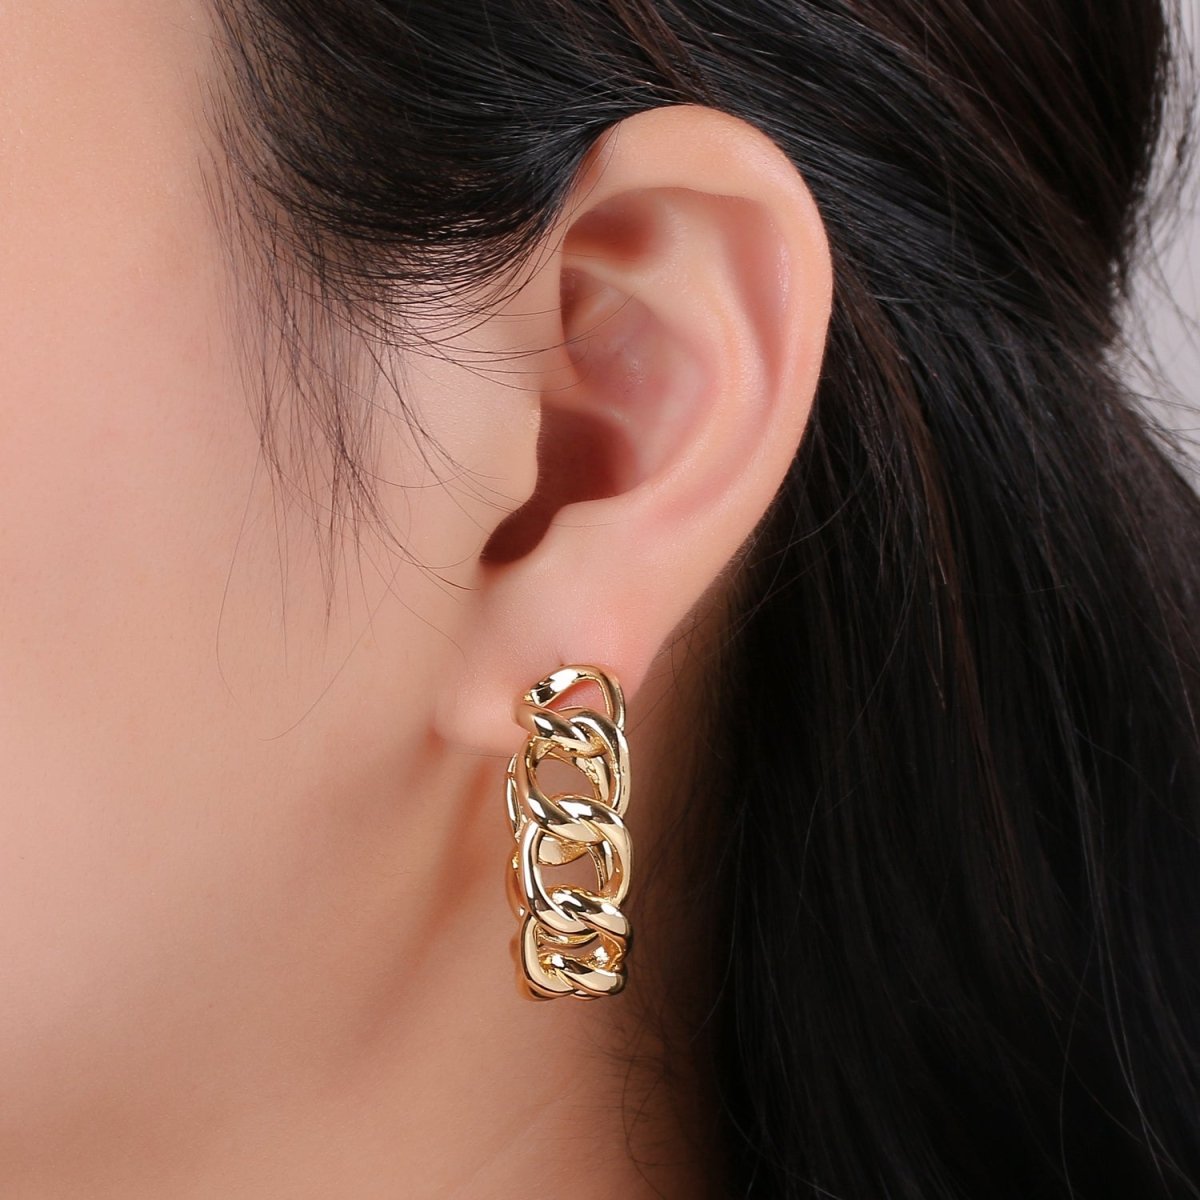 30mm Chunky Gold Link Hoops, Small Gold Large Chain Hoop Earrings, Gold Hoop Earrings, Small Hoop Earrings, Chain Hoops, Hoop Earrings Q-536 - DLUXCA